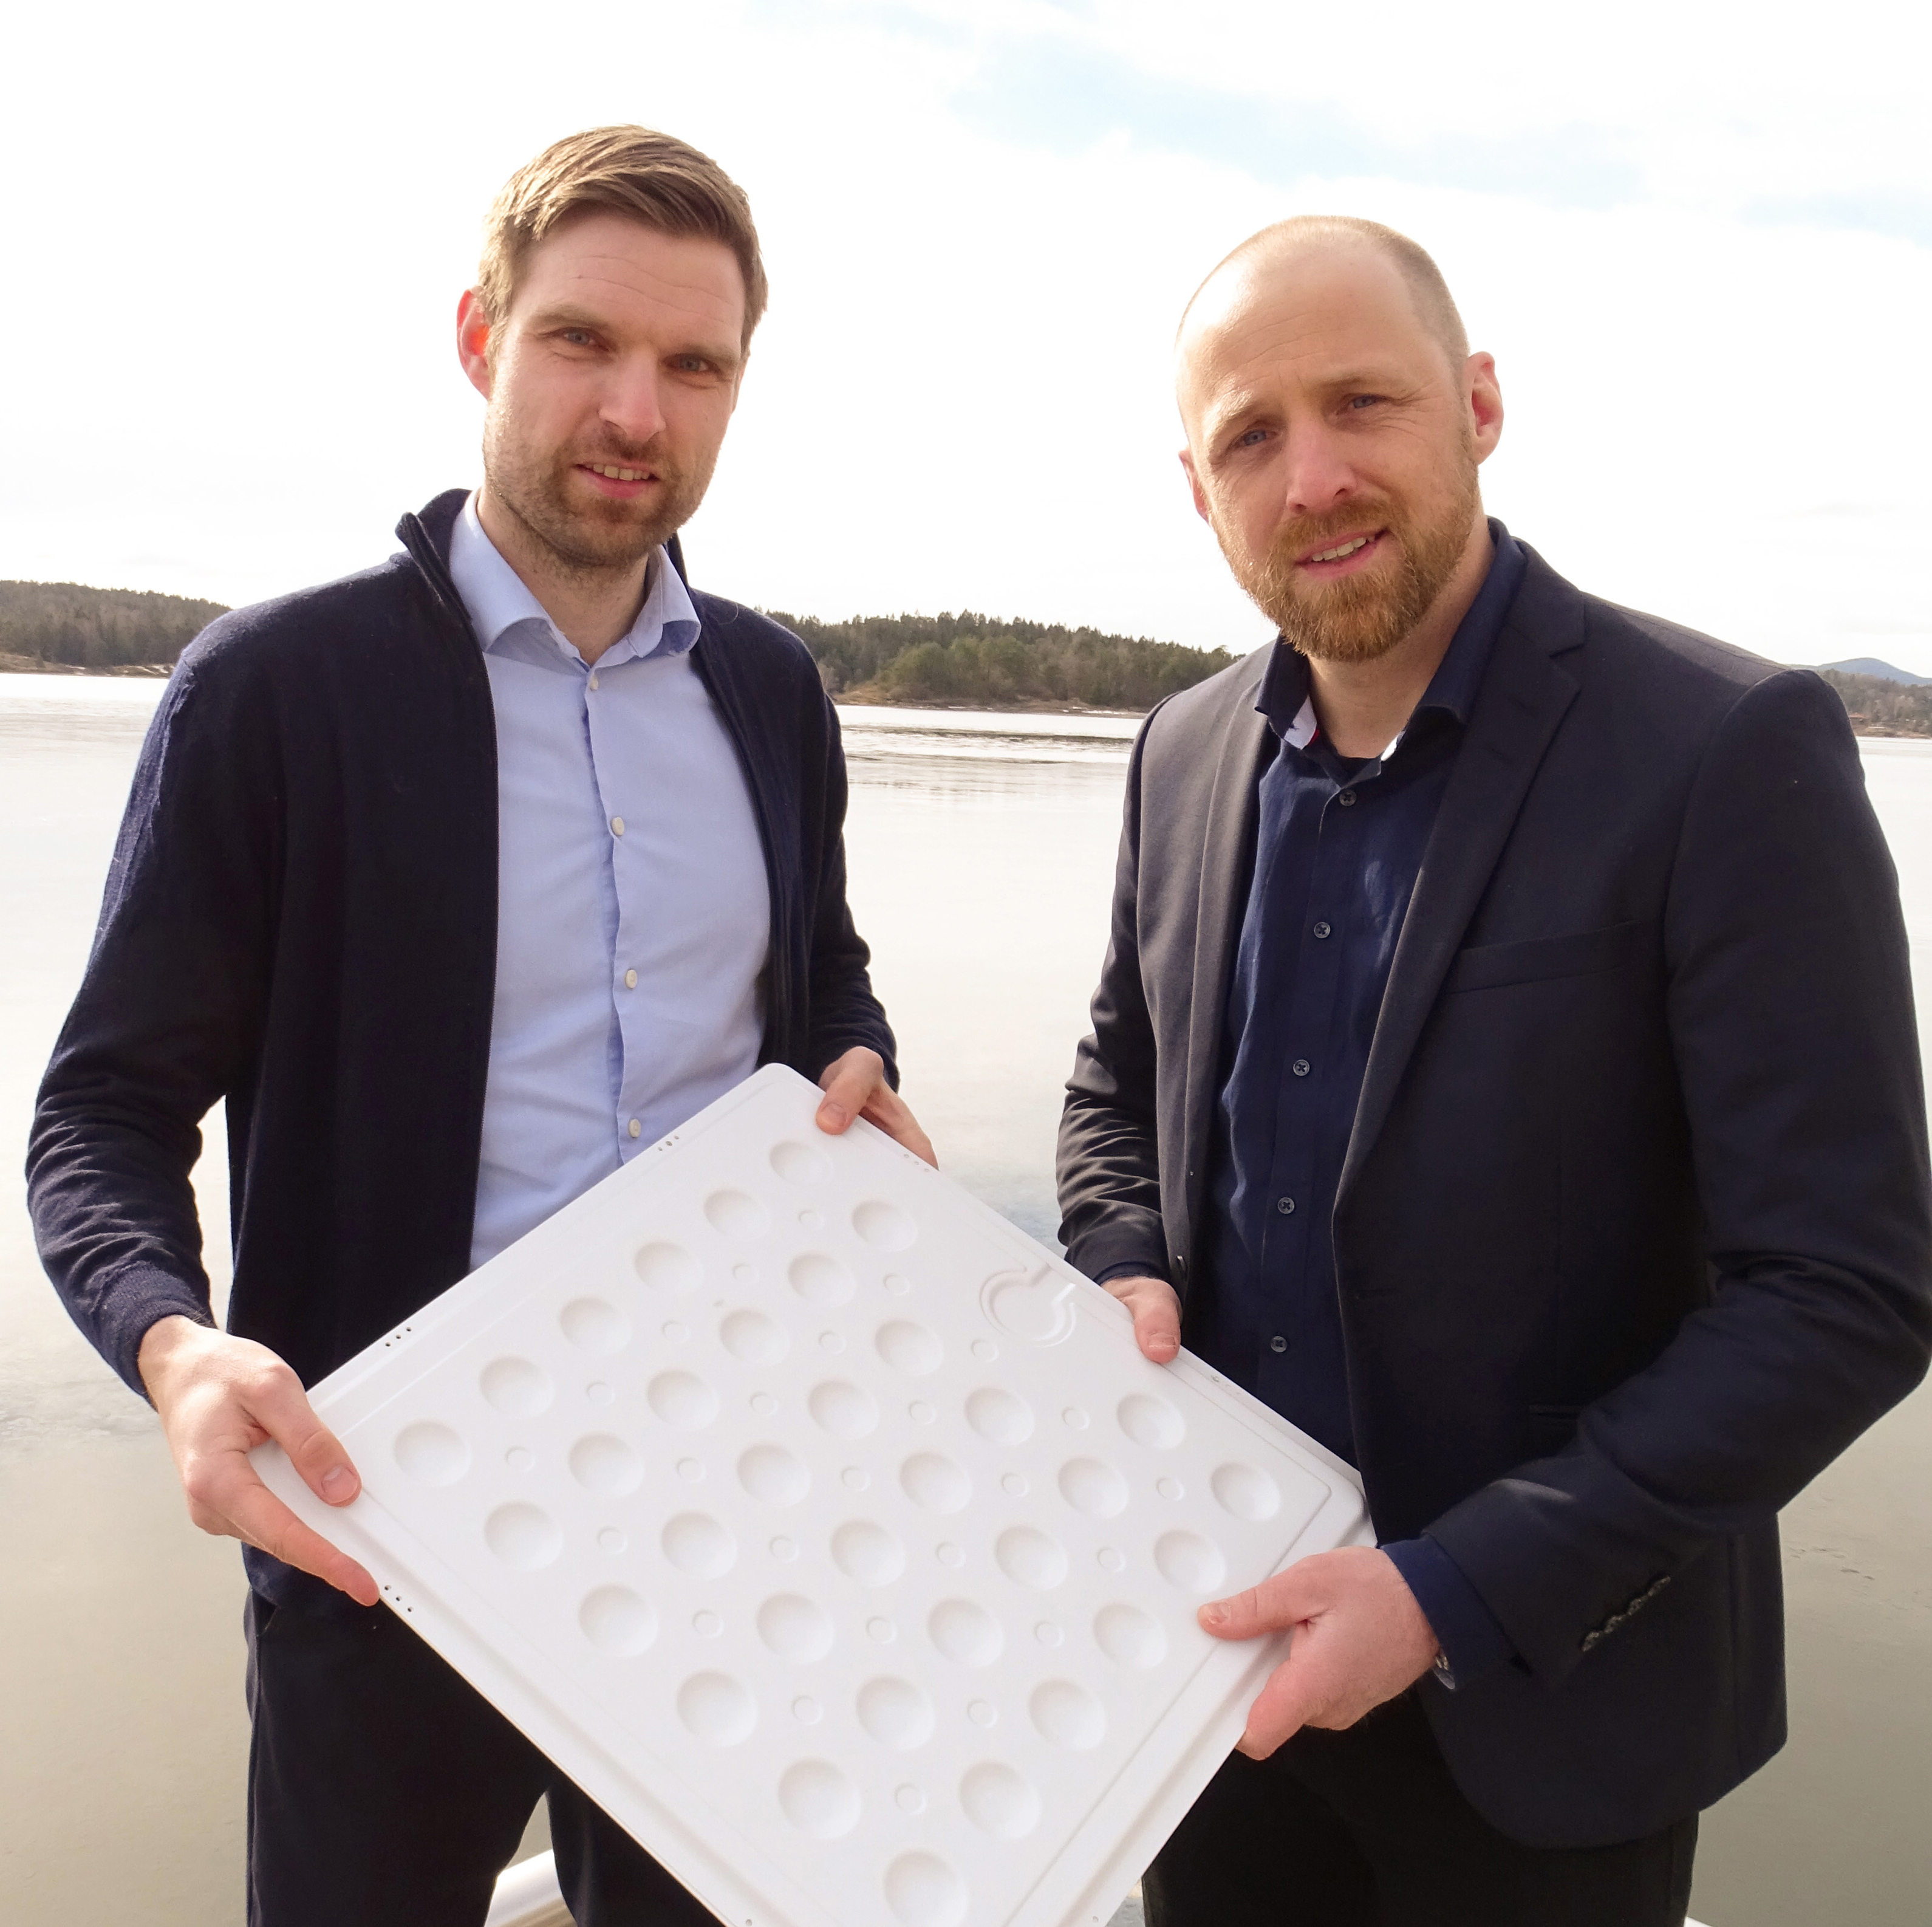 DNV project manager Tore Hordvik (left) and Sunlit Sea CTO Bjørn Hervold Riise (right) with a model of the Sunlit Sea aluminum sheet